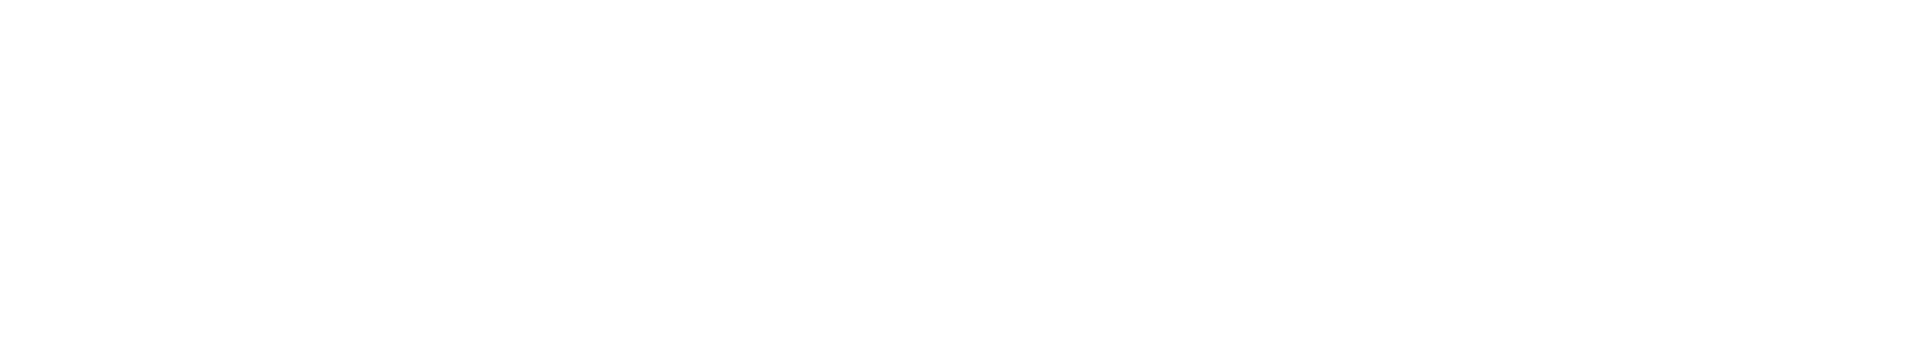 A green silhouette of the mountains on a white background